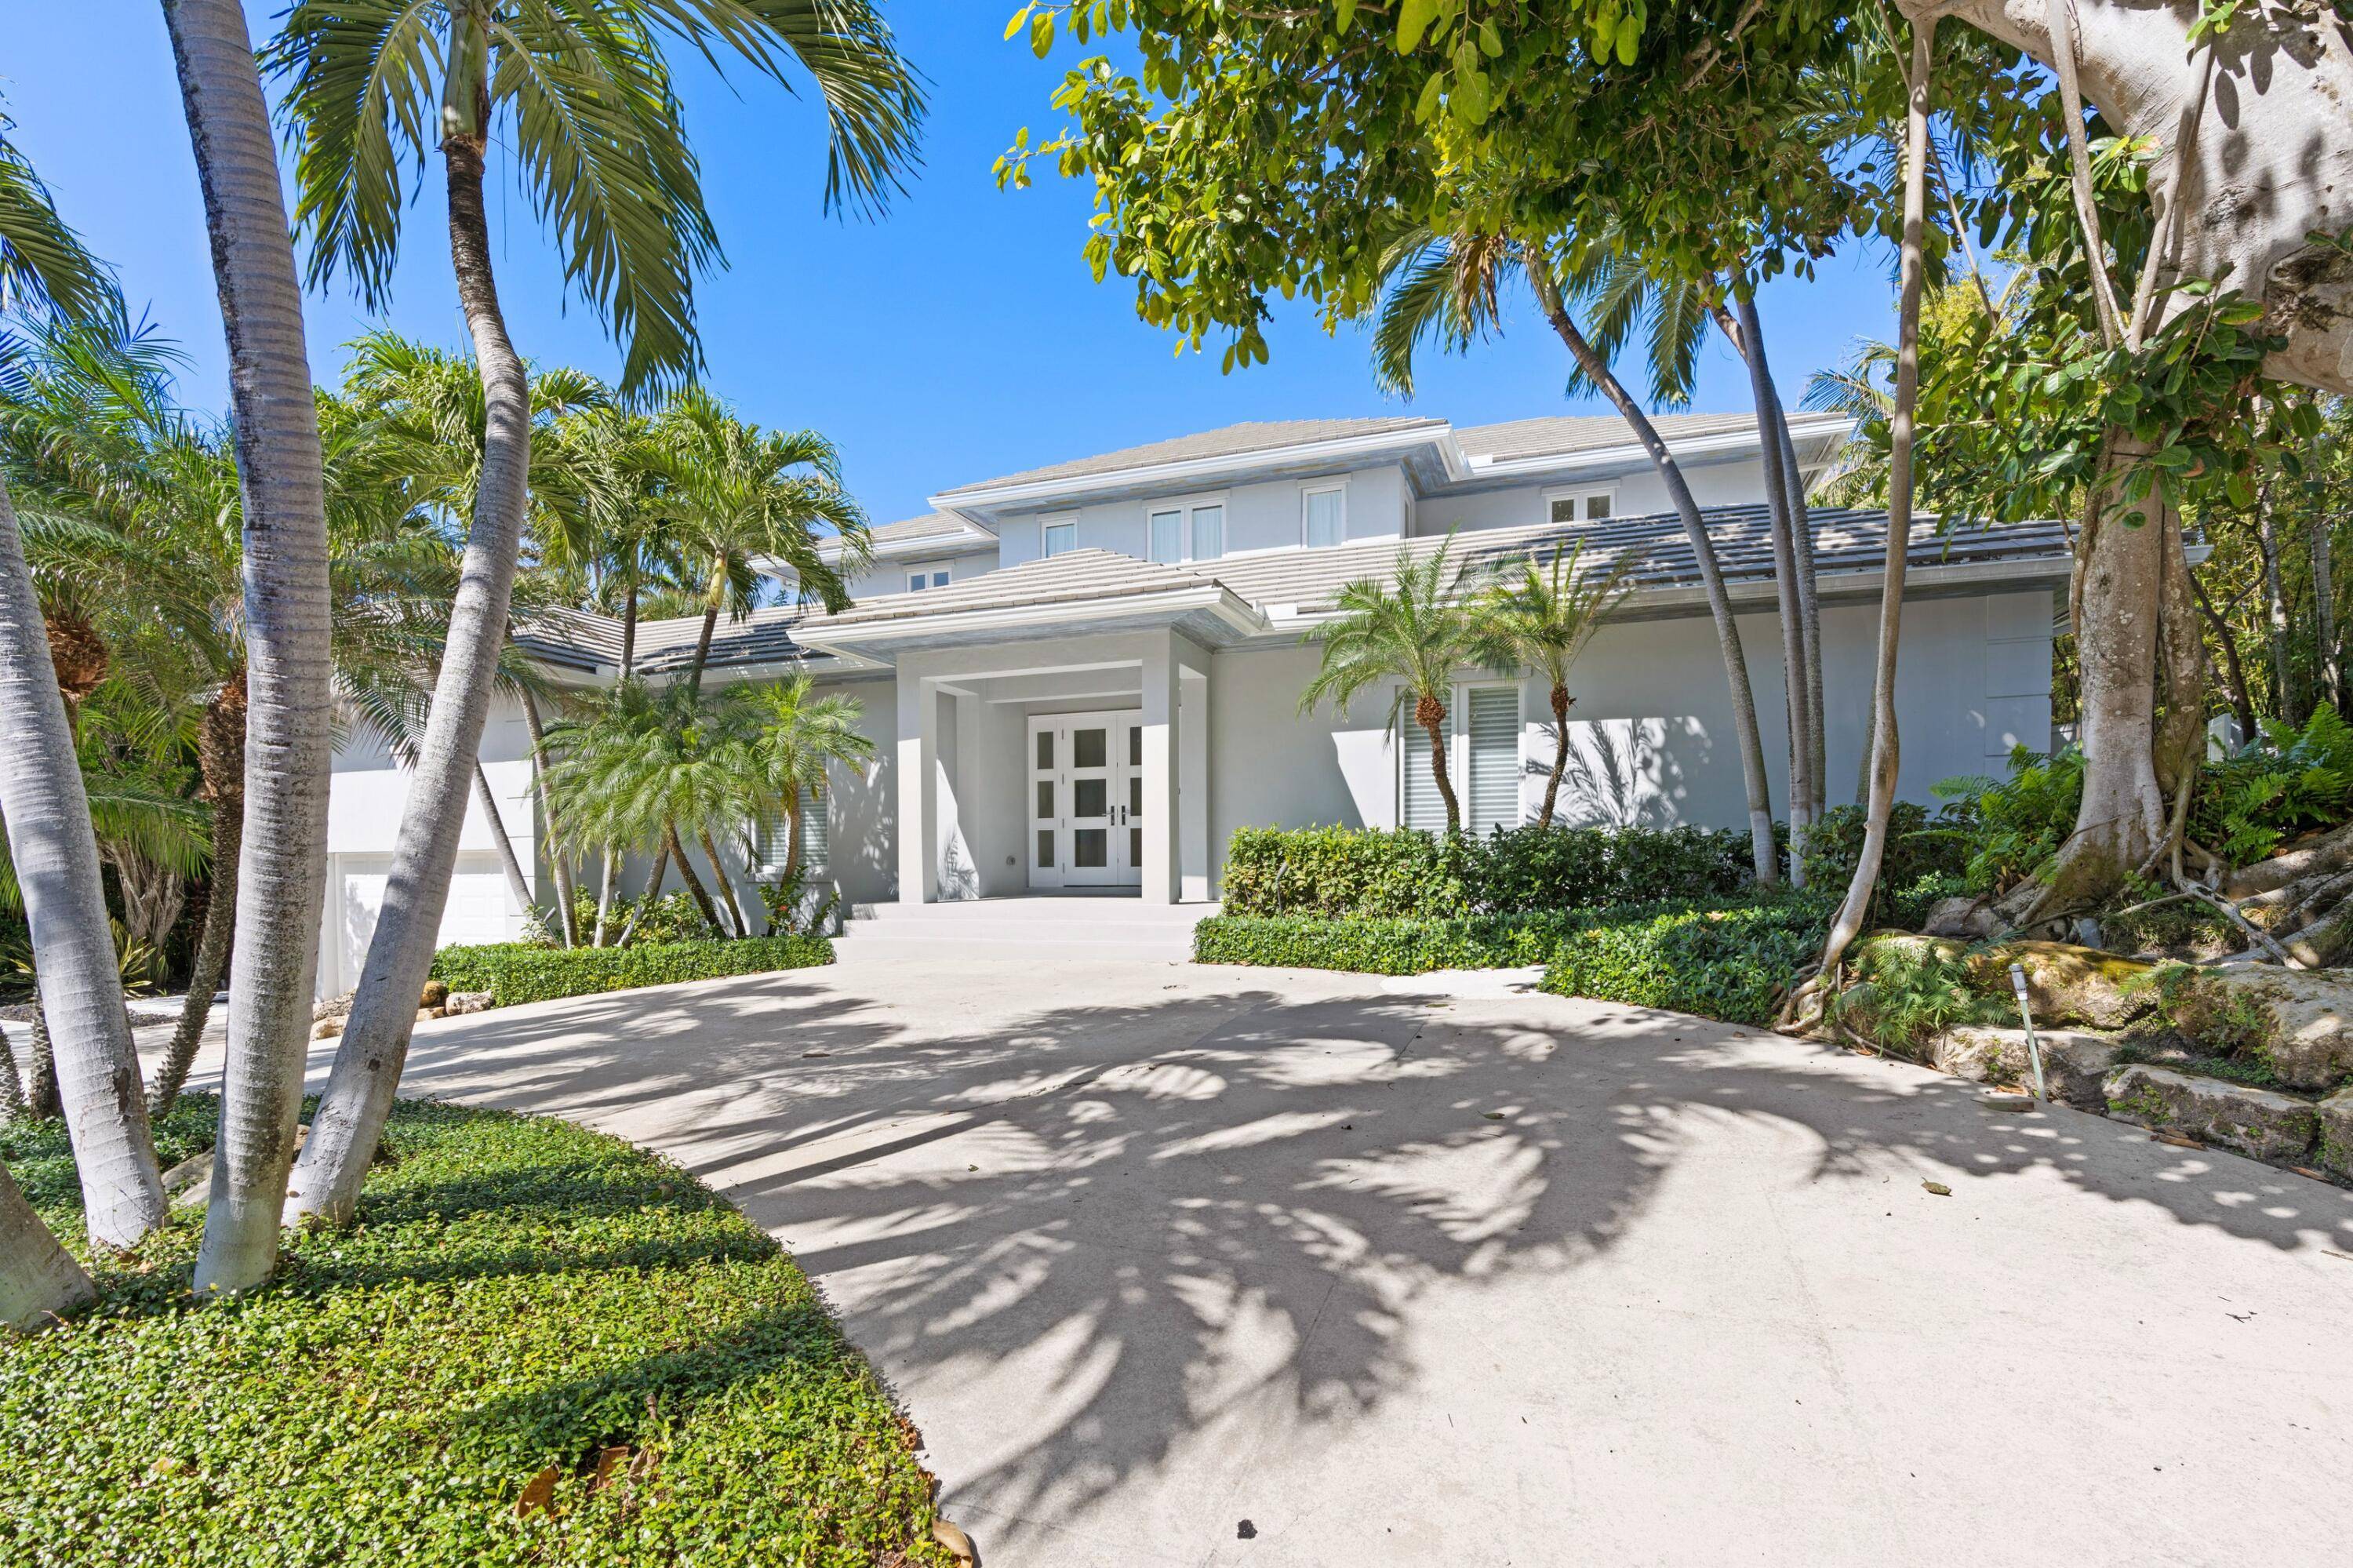 Located just four properties from the ocean, this Mid Century Modern home comprises a 5 bedroom main house and a two story guest house on a generous 14, 810 SF ...